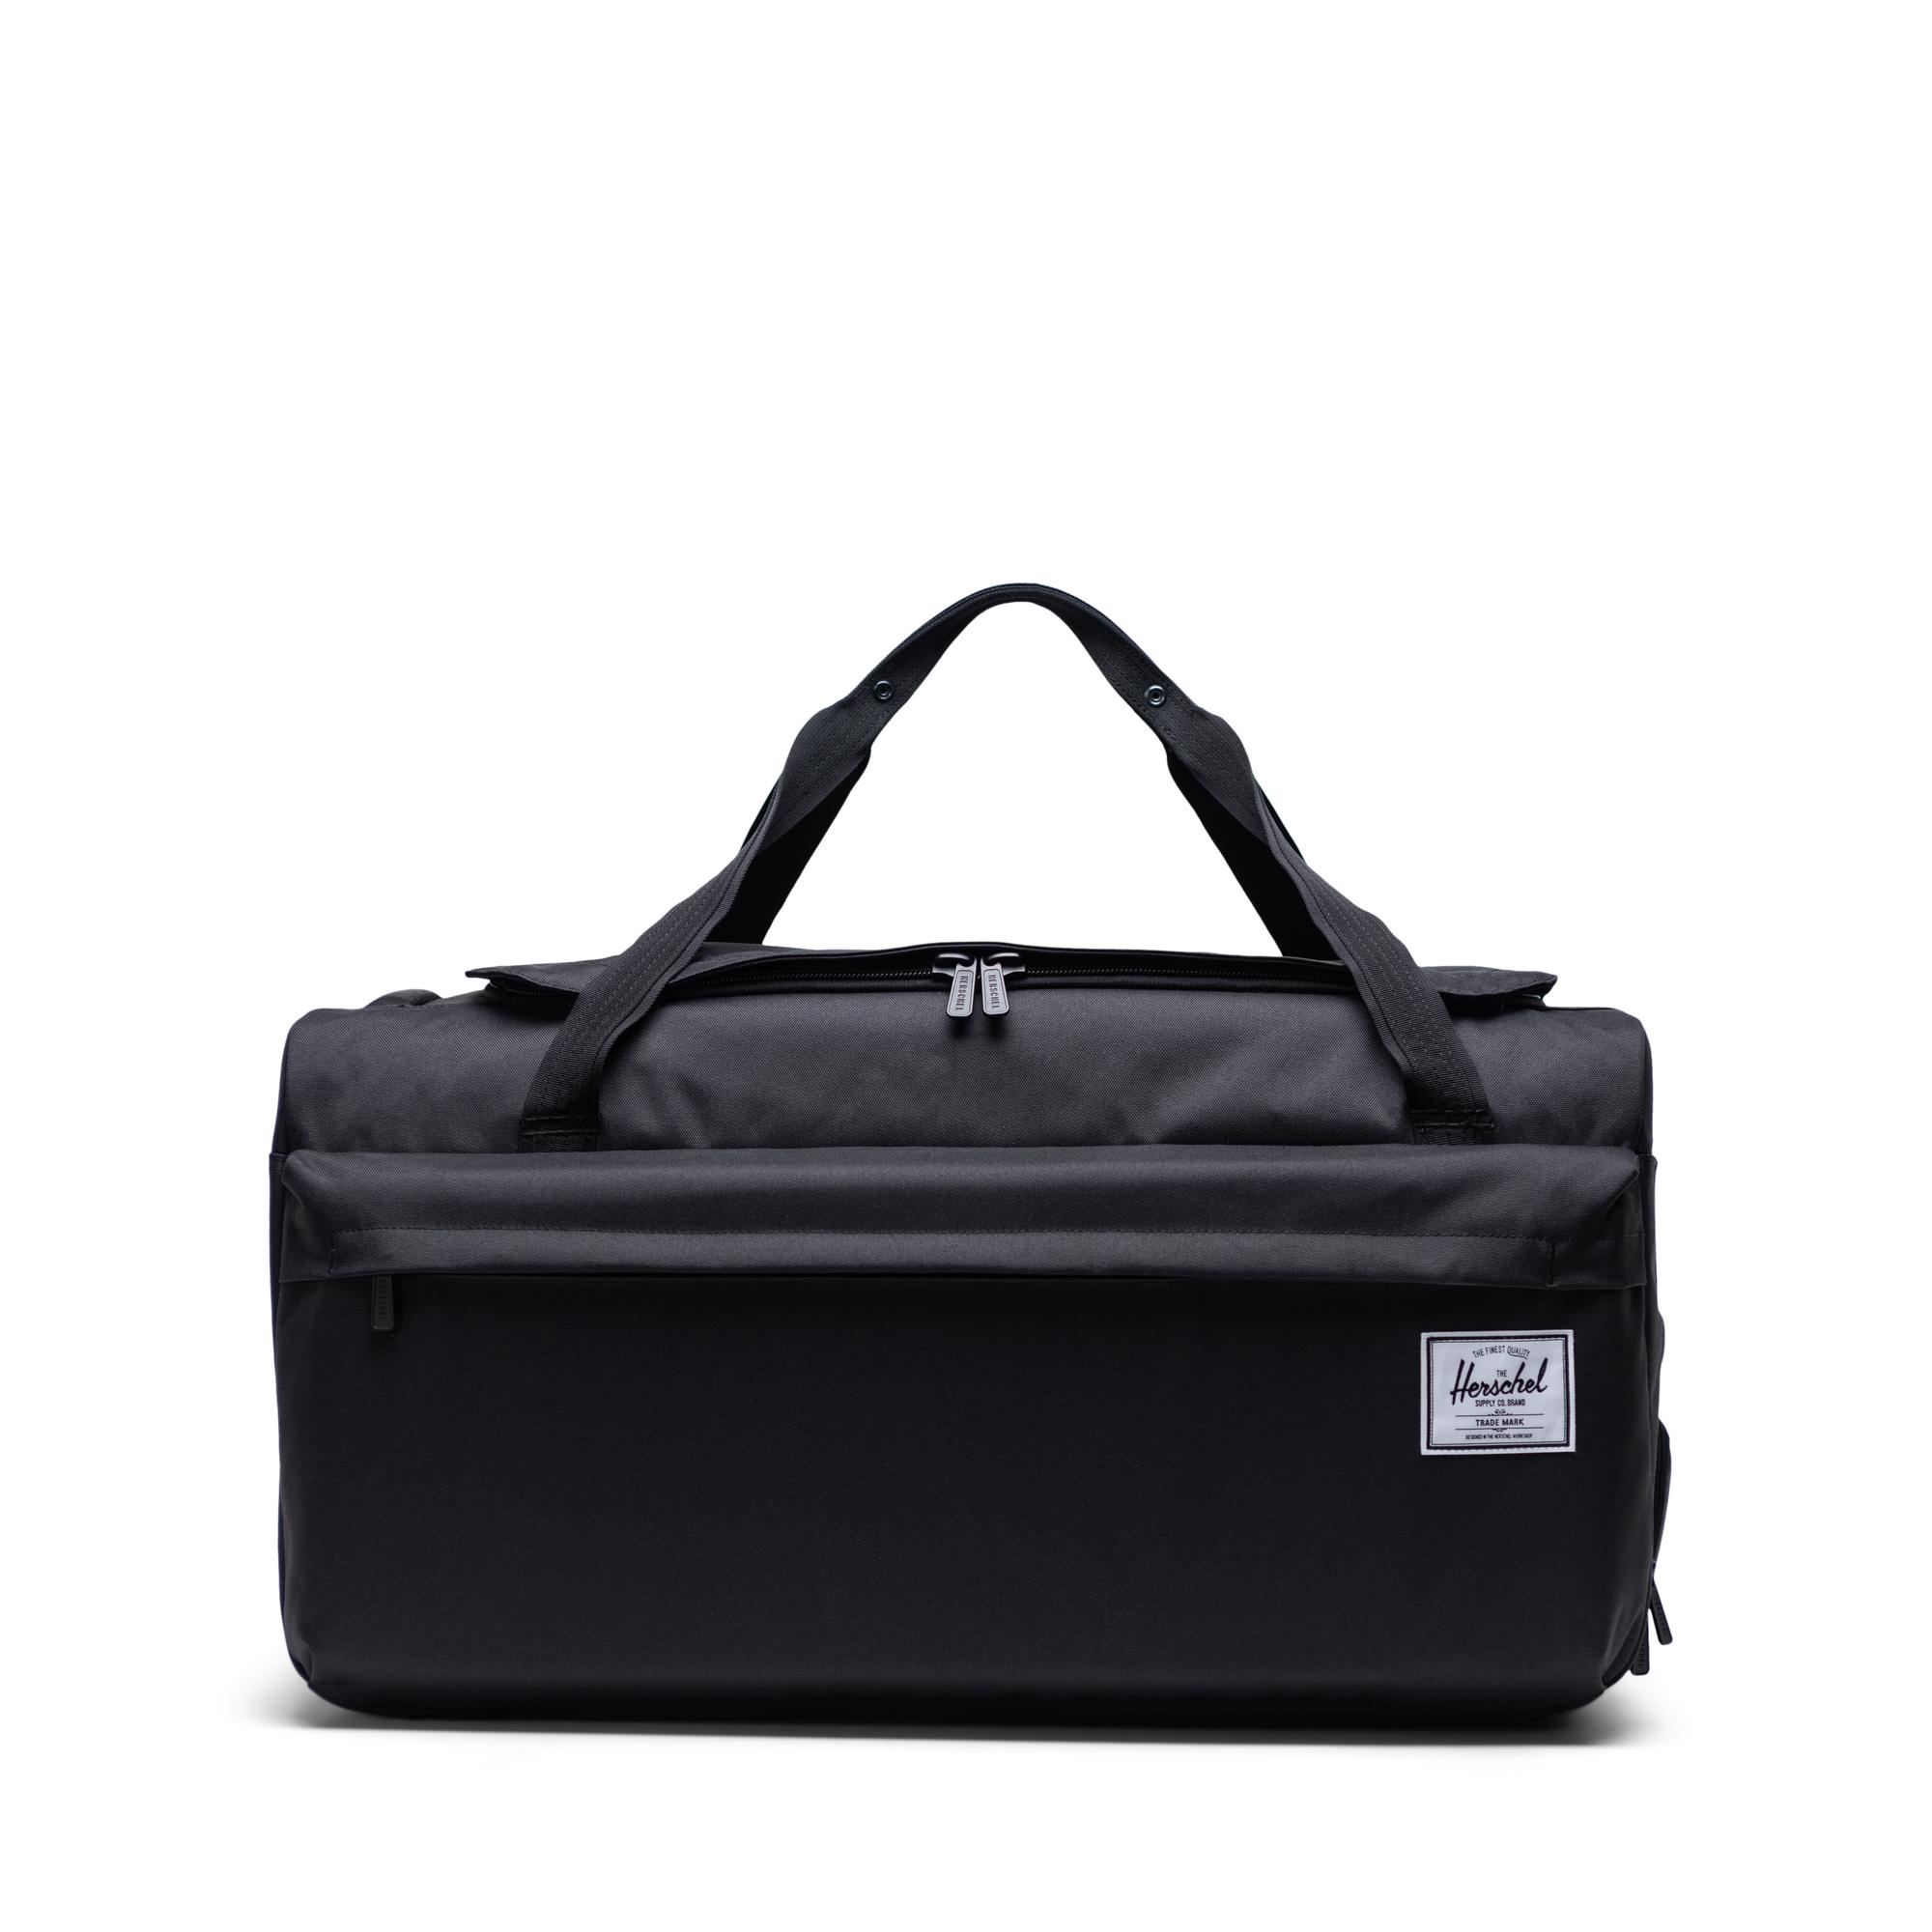 Outfitter Luggage 70L Bag | Herschel Supply Co.